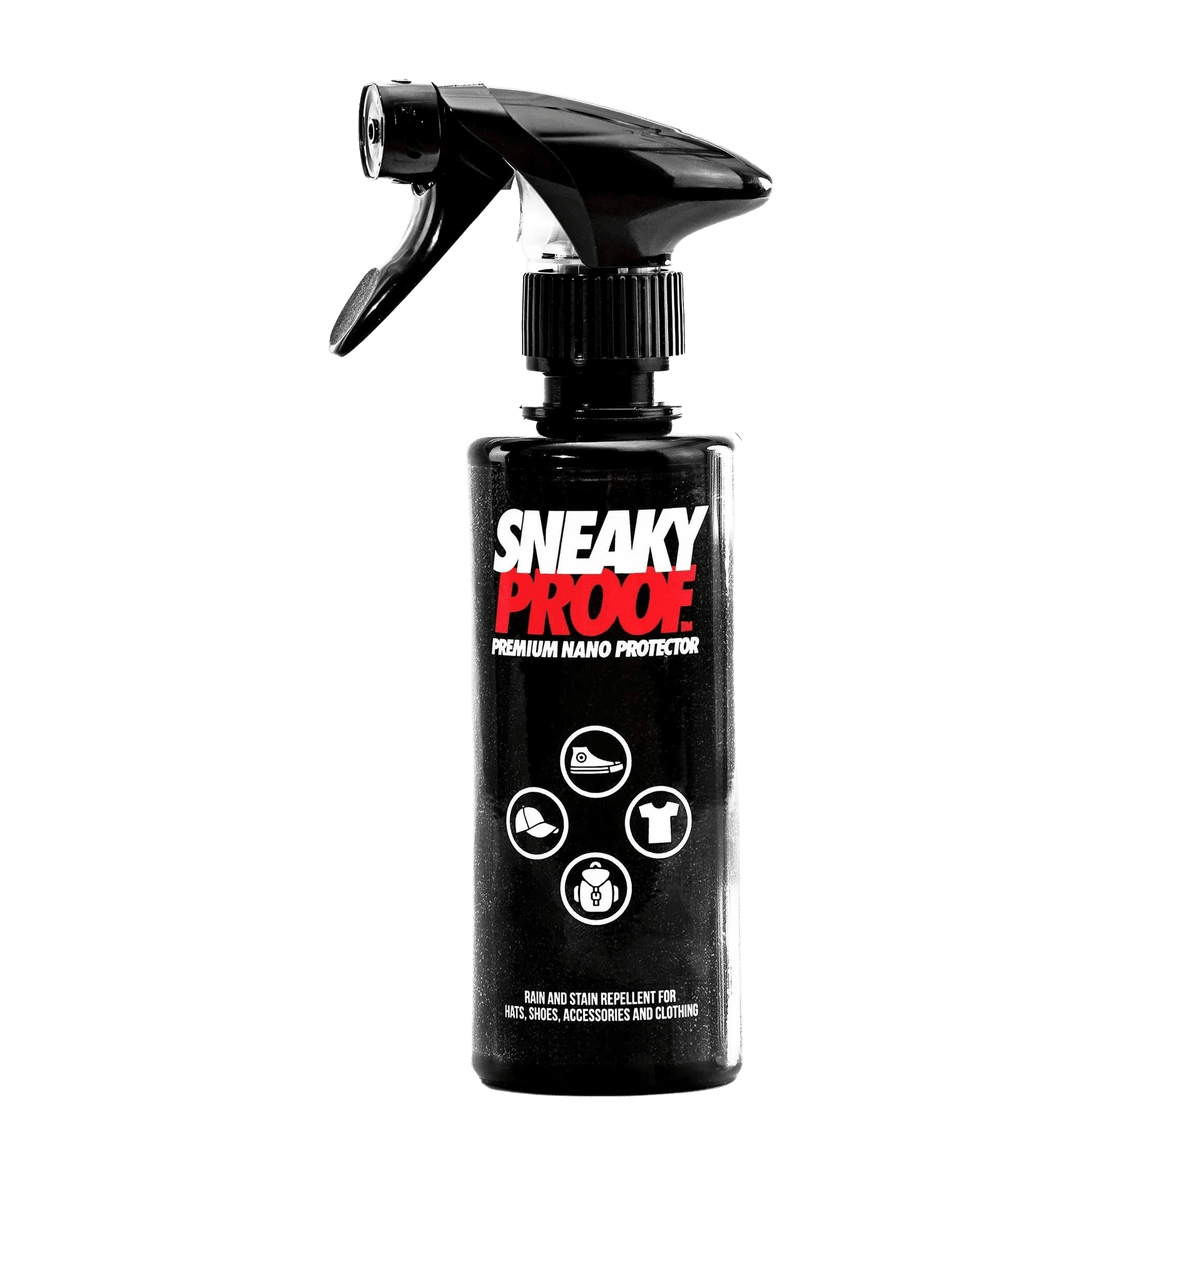 Sneaky Proof - Performance Protector and Waterproof Spray - CerbeShops